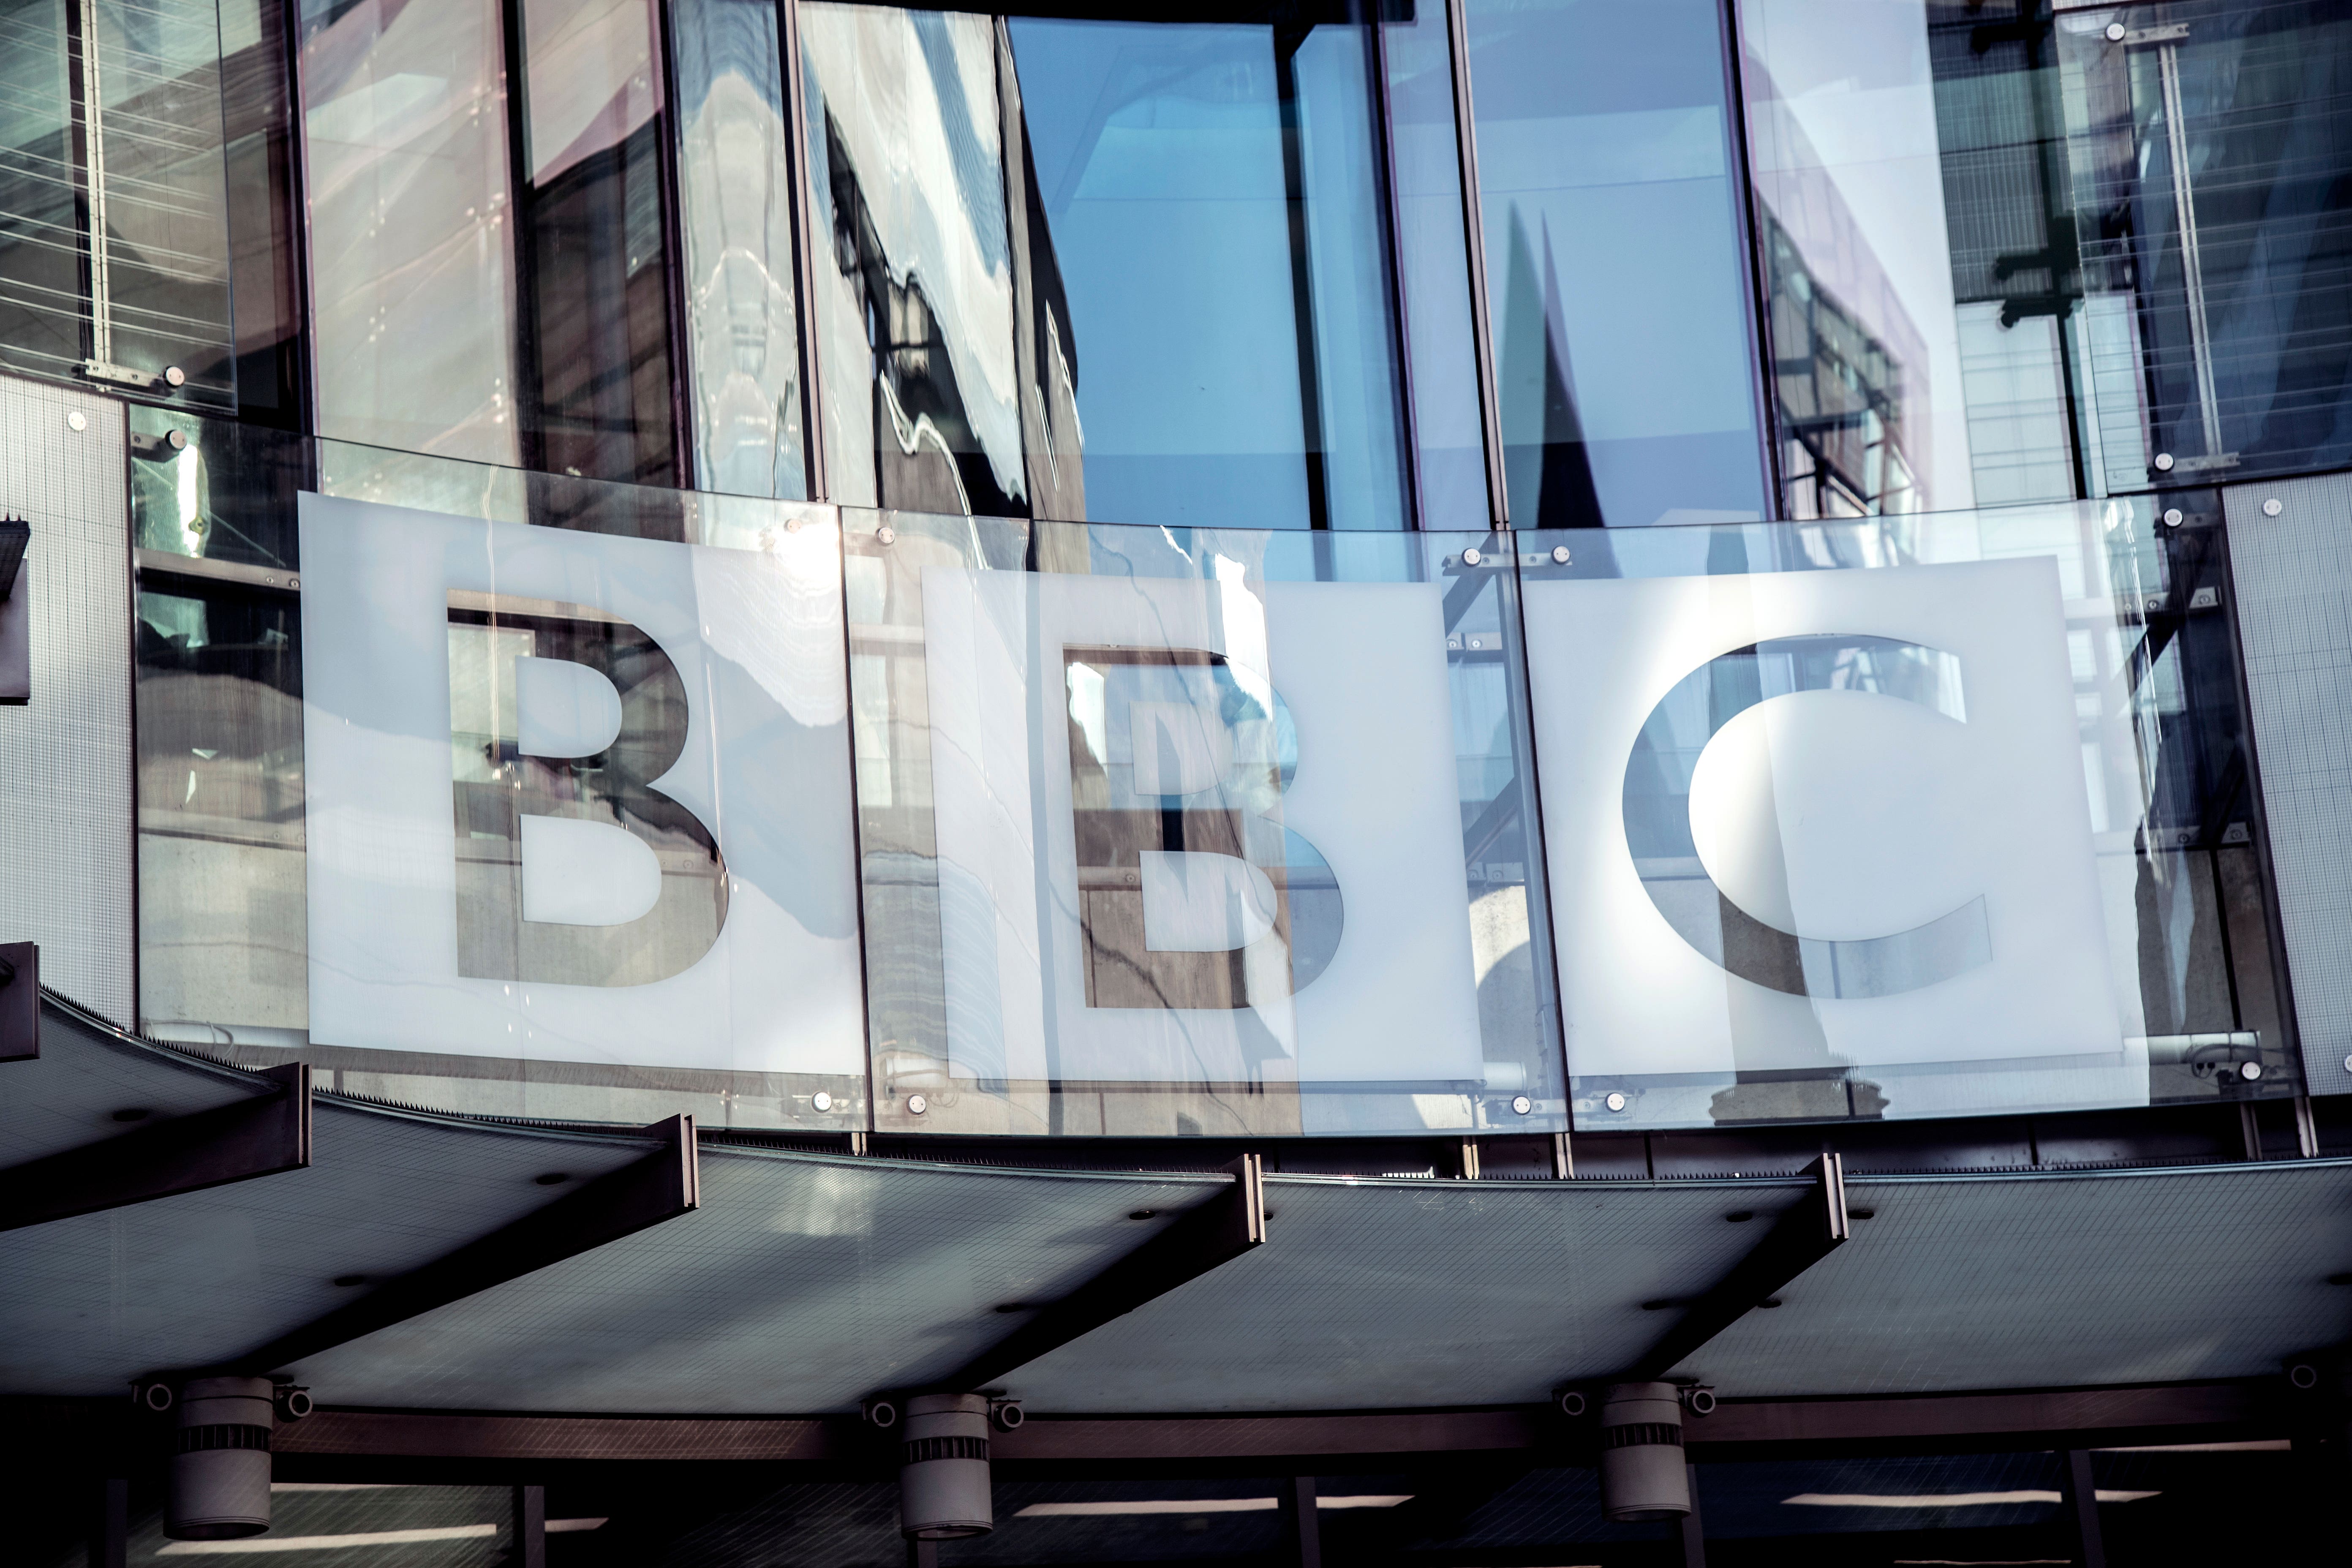 The BBC needs to do more to connect with audiences from lower incomes, according to media watchdog Ofcom. (Ian West/PA)